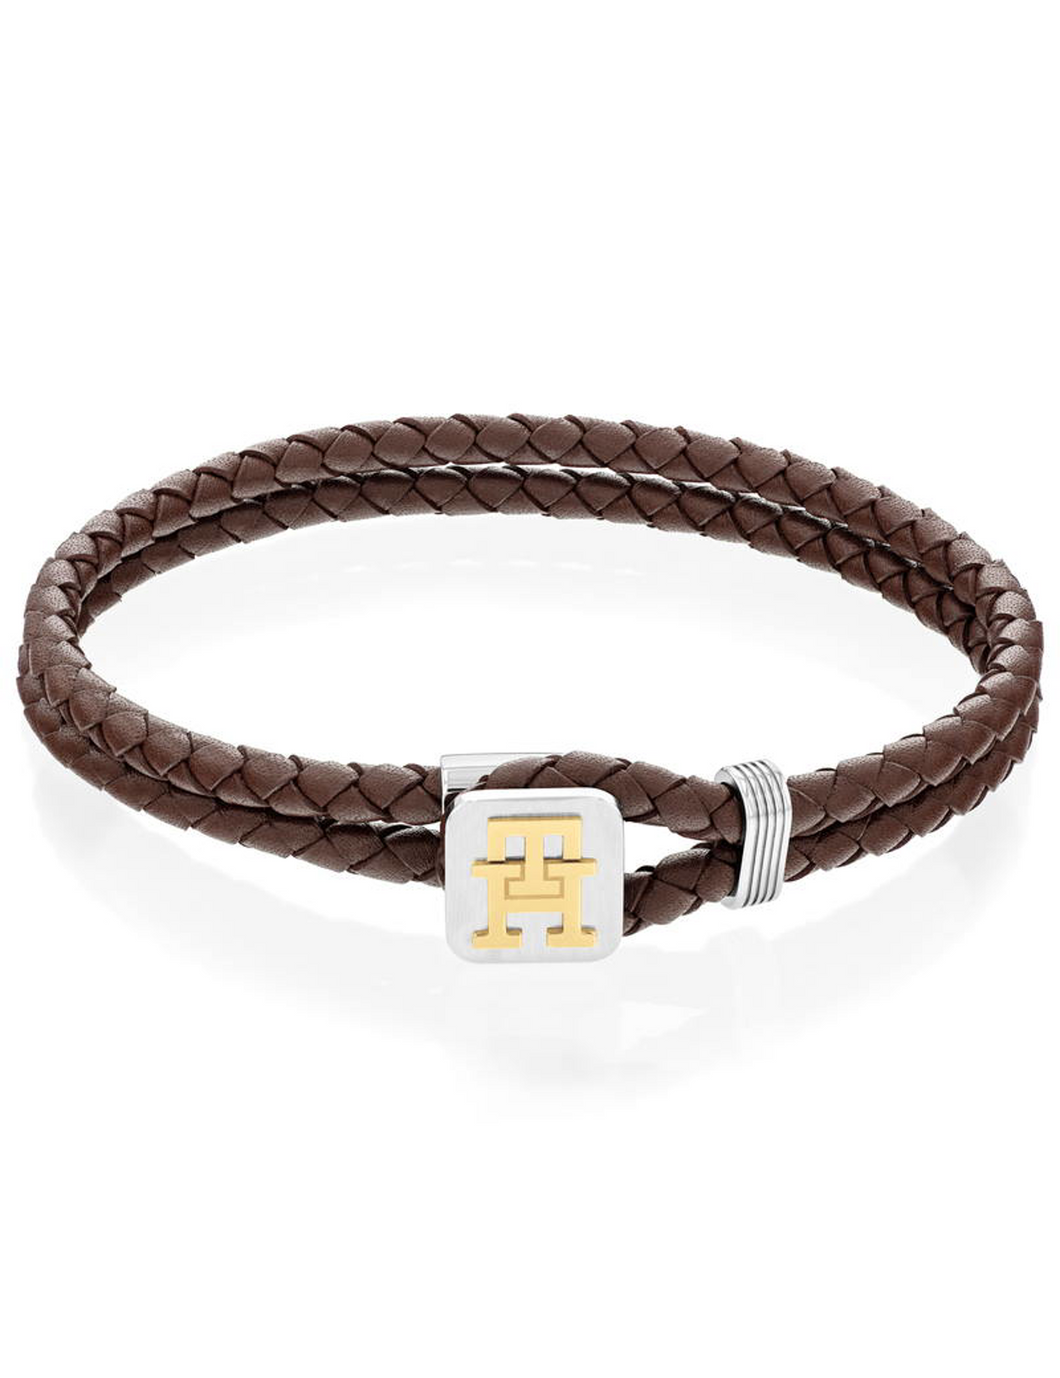 Tommy Hilfiger Gents Brown Leather Double Row Braided Bracelet SKU 3016080